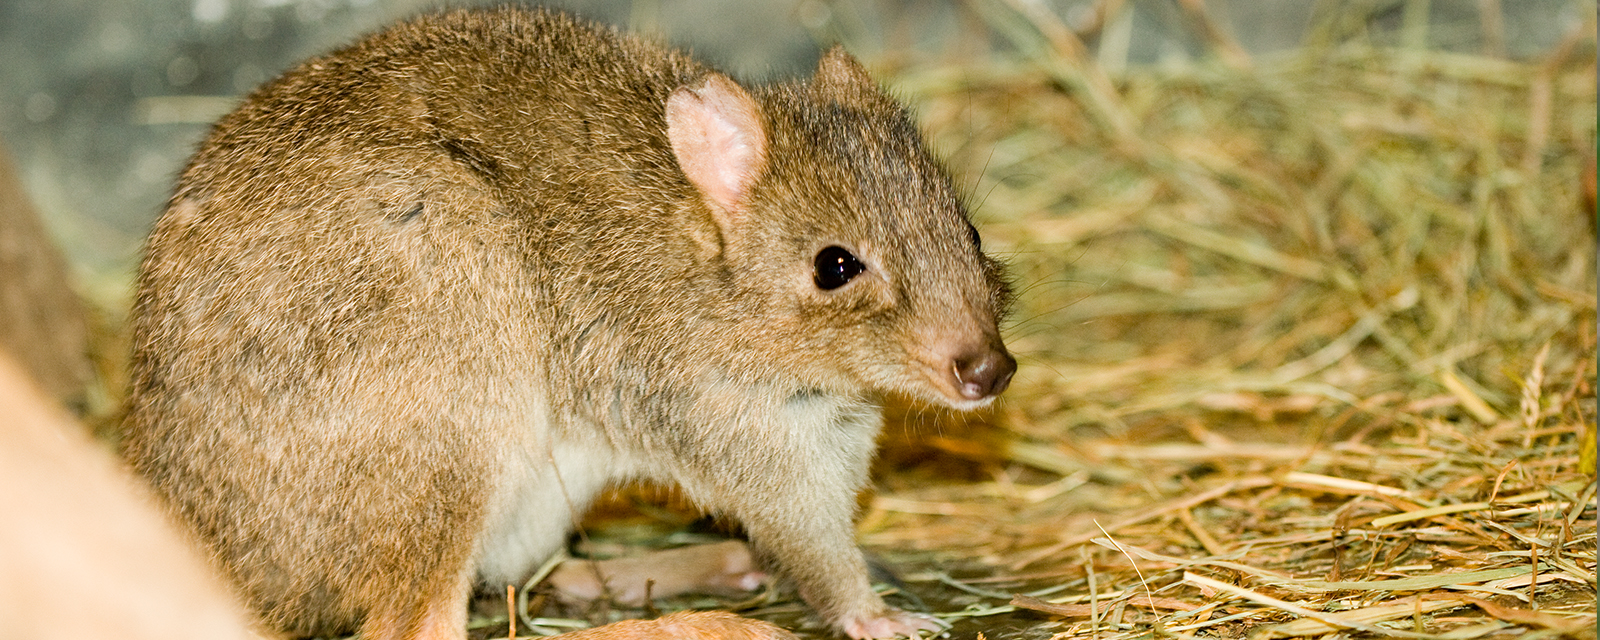 A bettong in exhibit